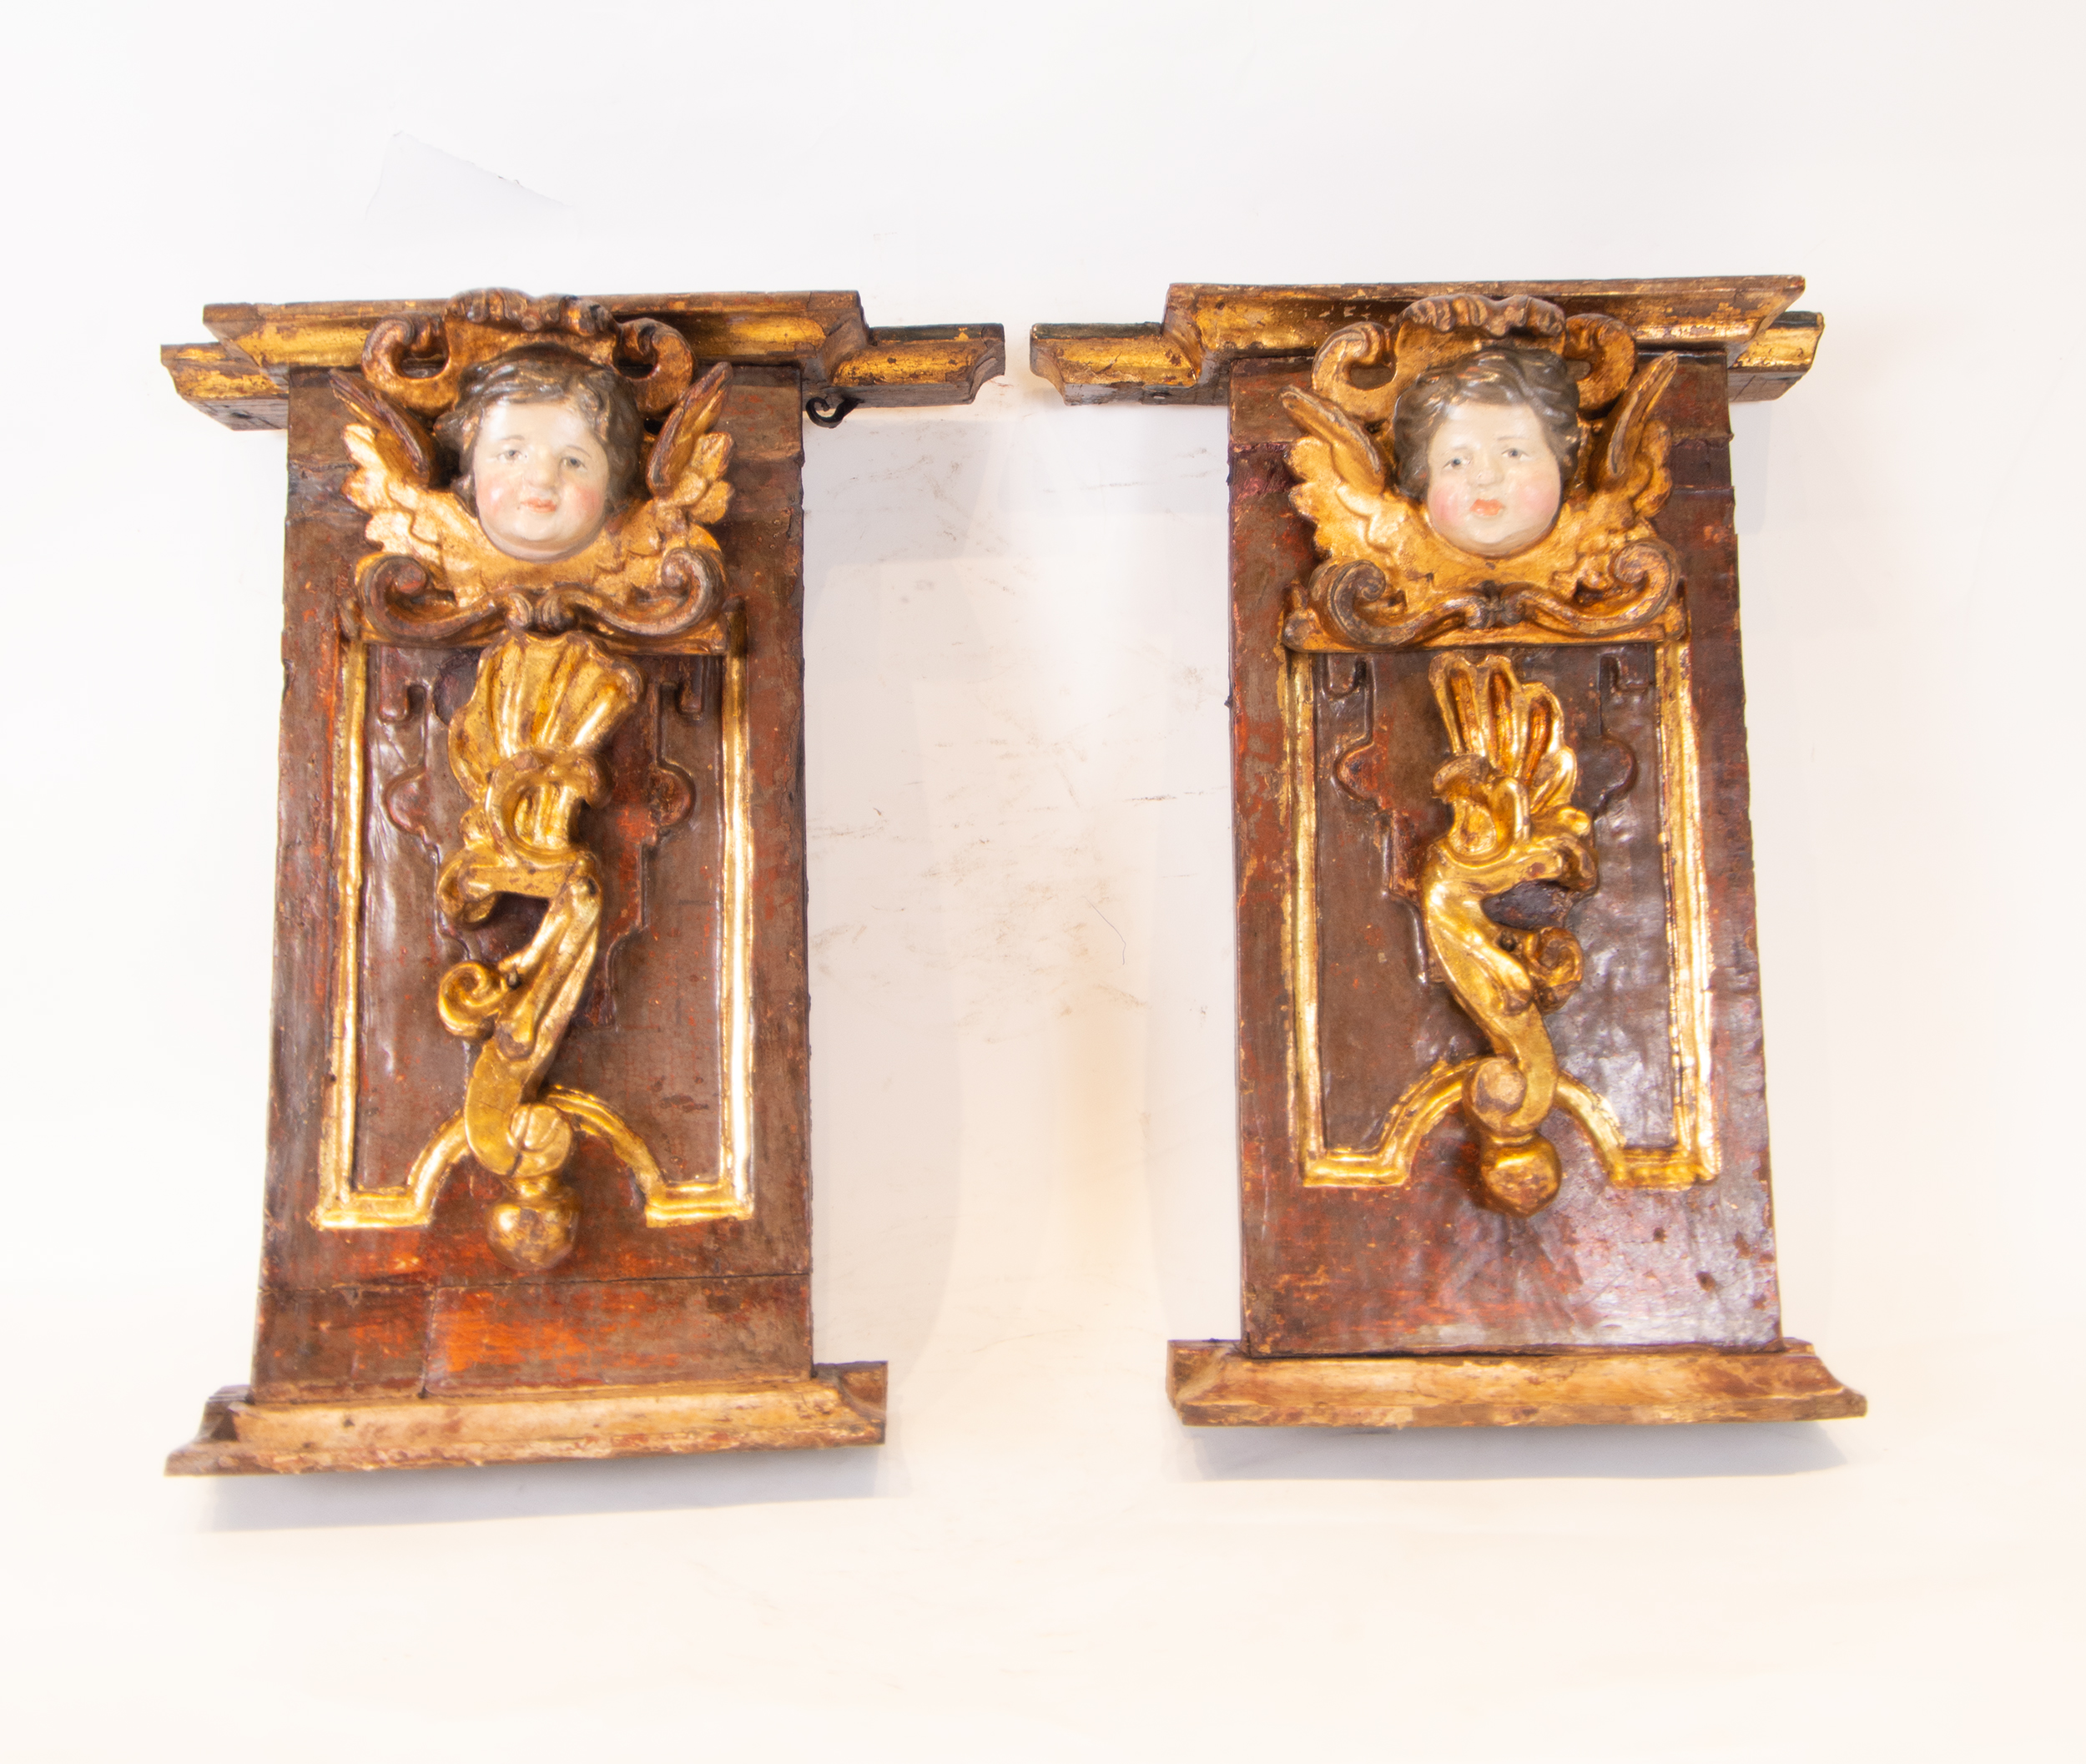 Pair of Portuguese Wall Corbels with Angels in gilt and polychrome Wood, Portuguese school of the 16